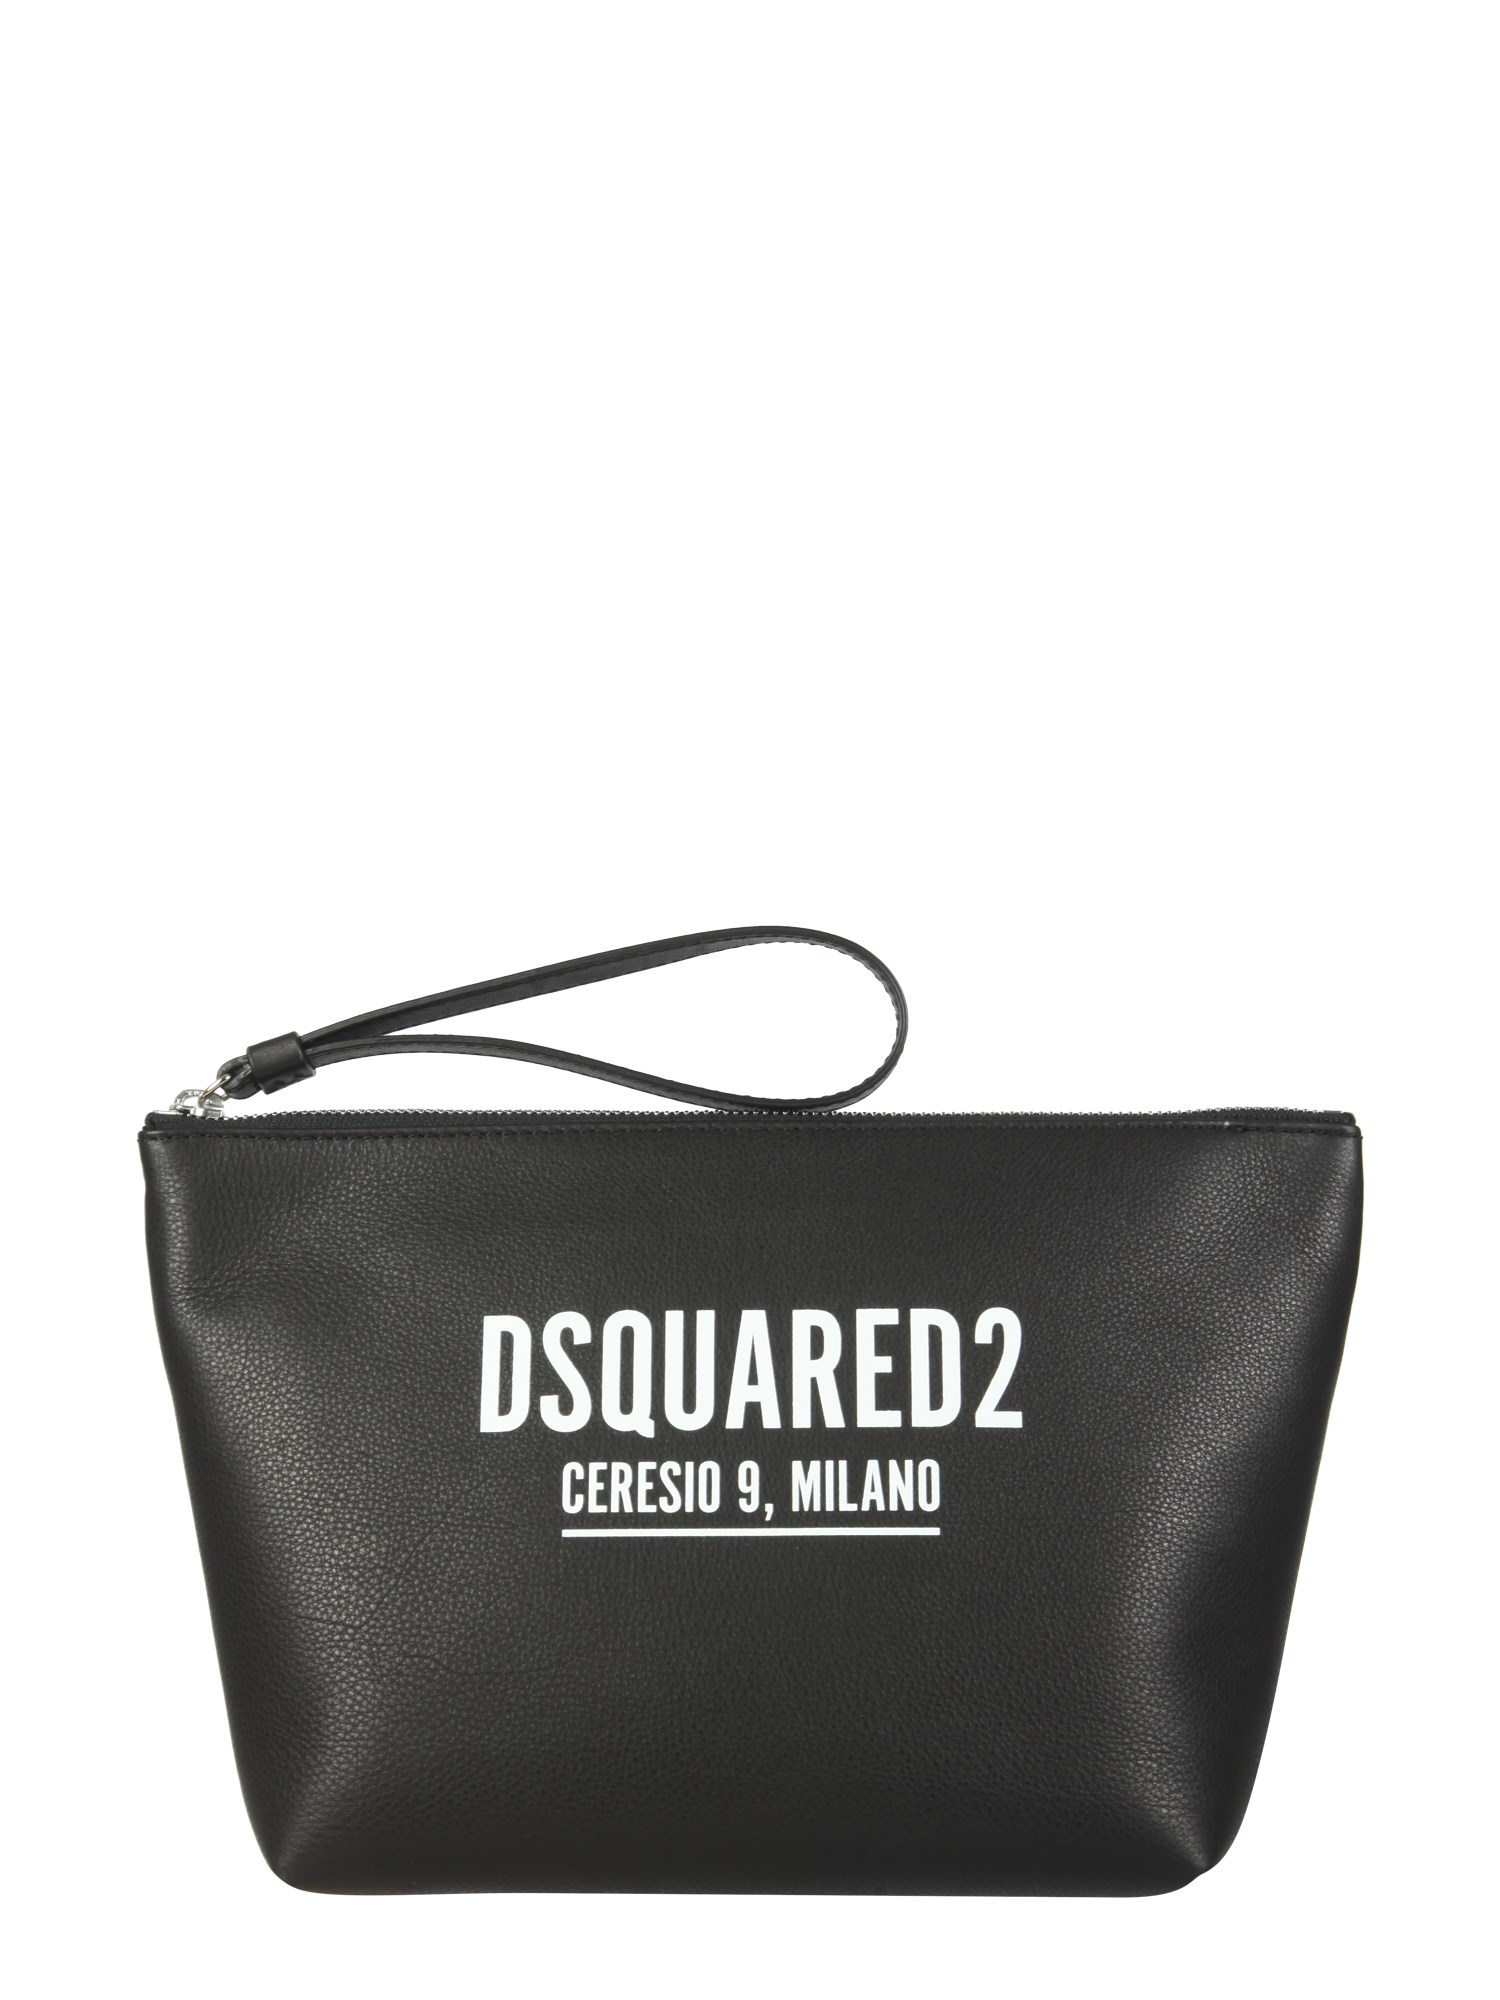 dsquared beauty case with ceresio logo print 9